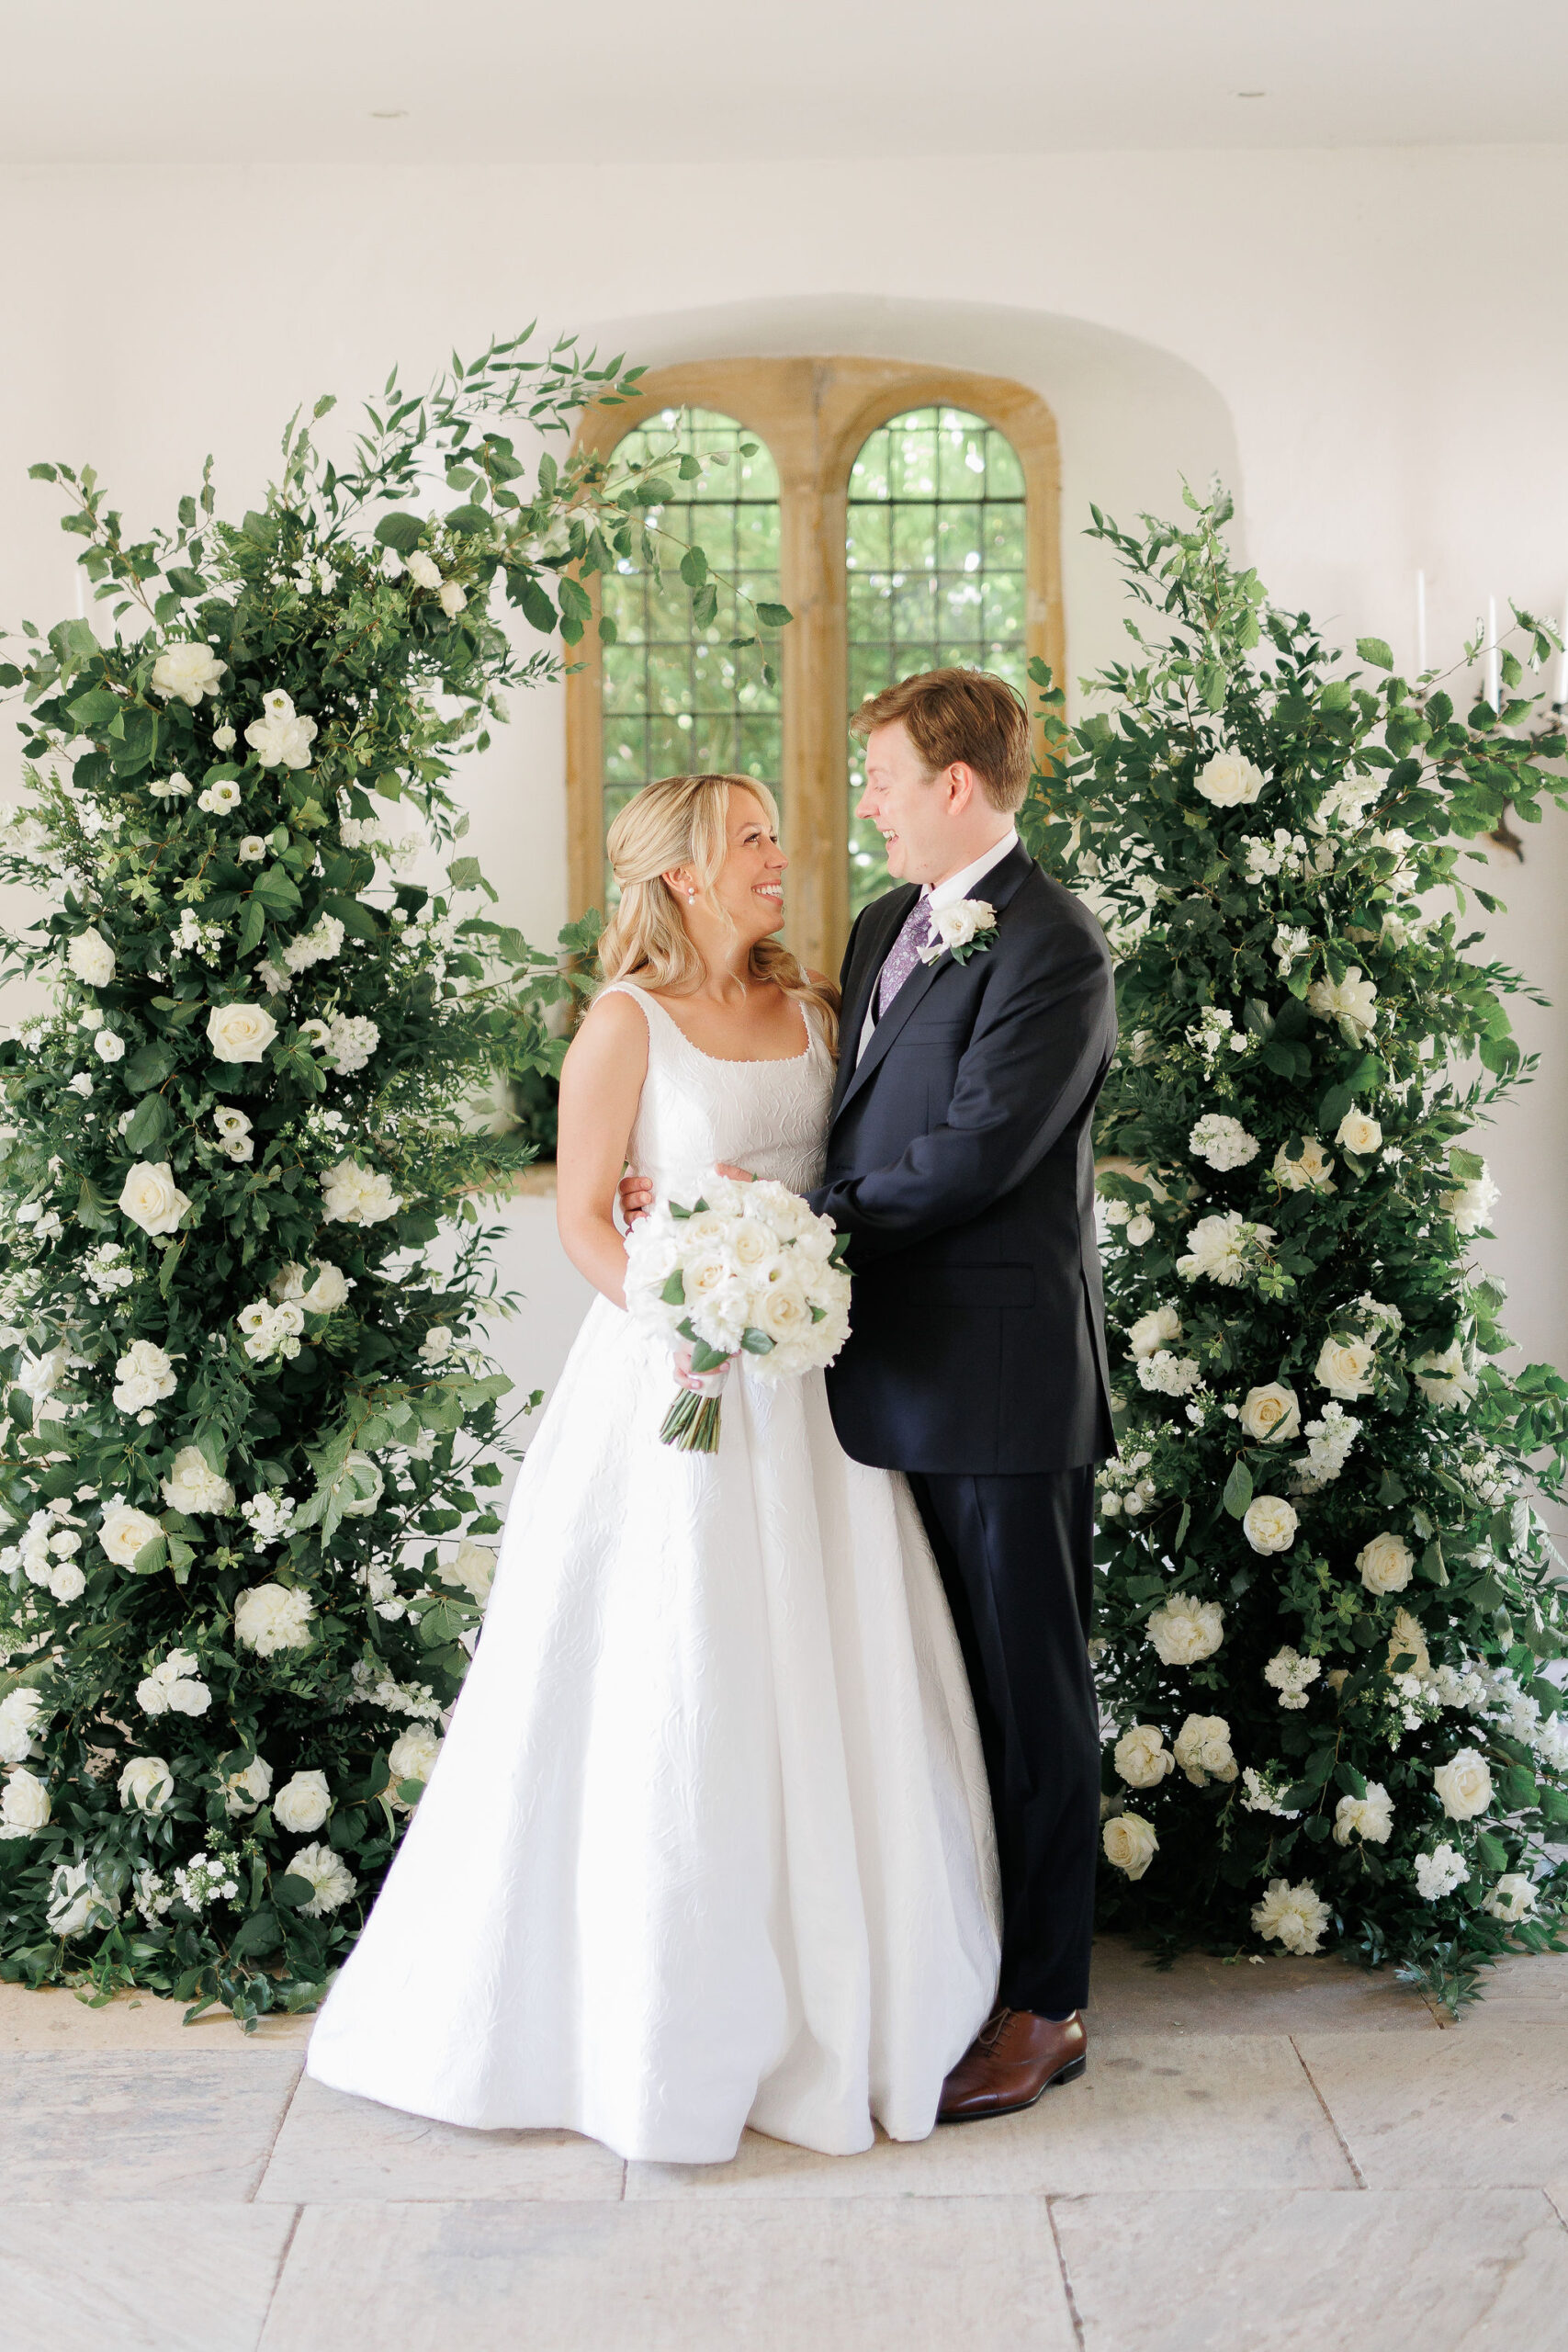 Brympton House wedding florist Flourish and Grace with White Stag Weddings Photography ceremony arch with foliage and white flowers